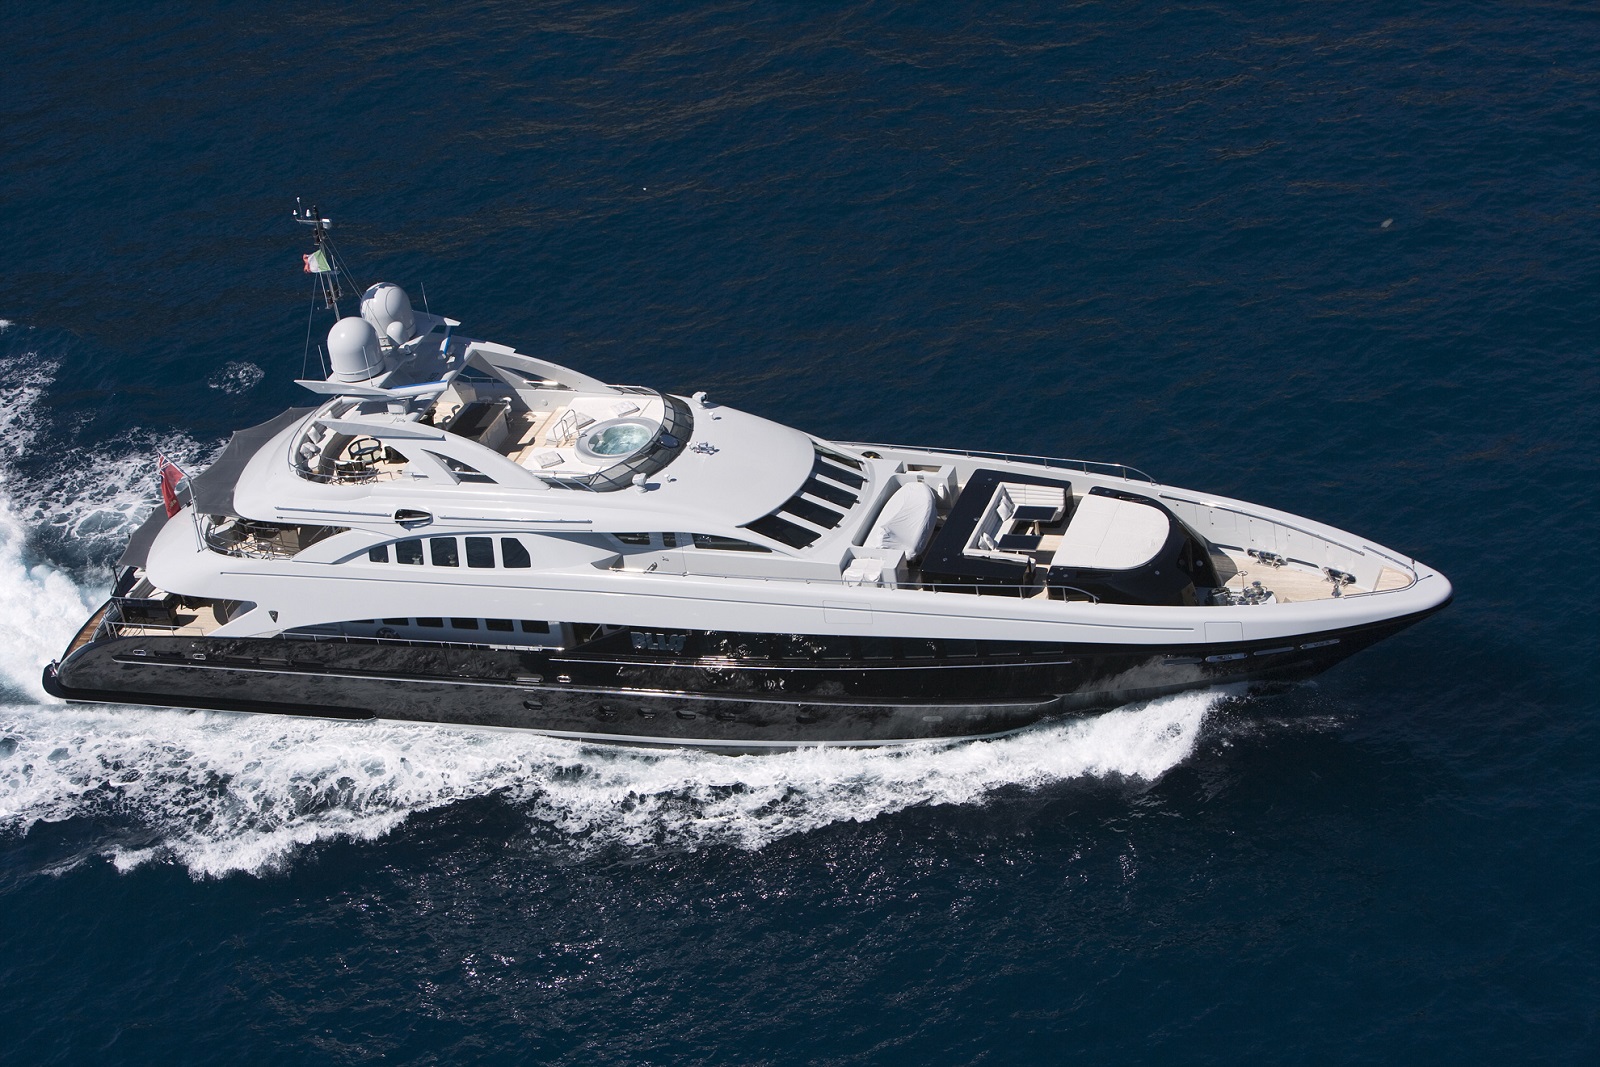 Yacht BLISS By Heesen - Profile Underway From Above